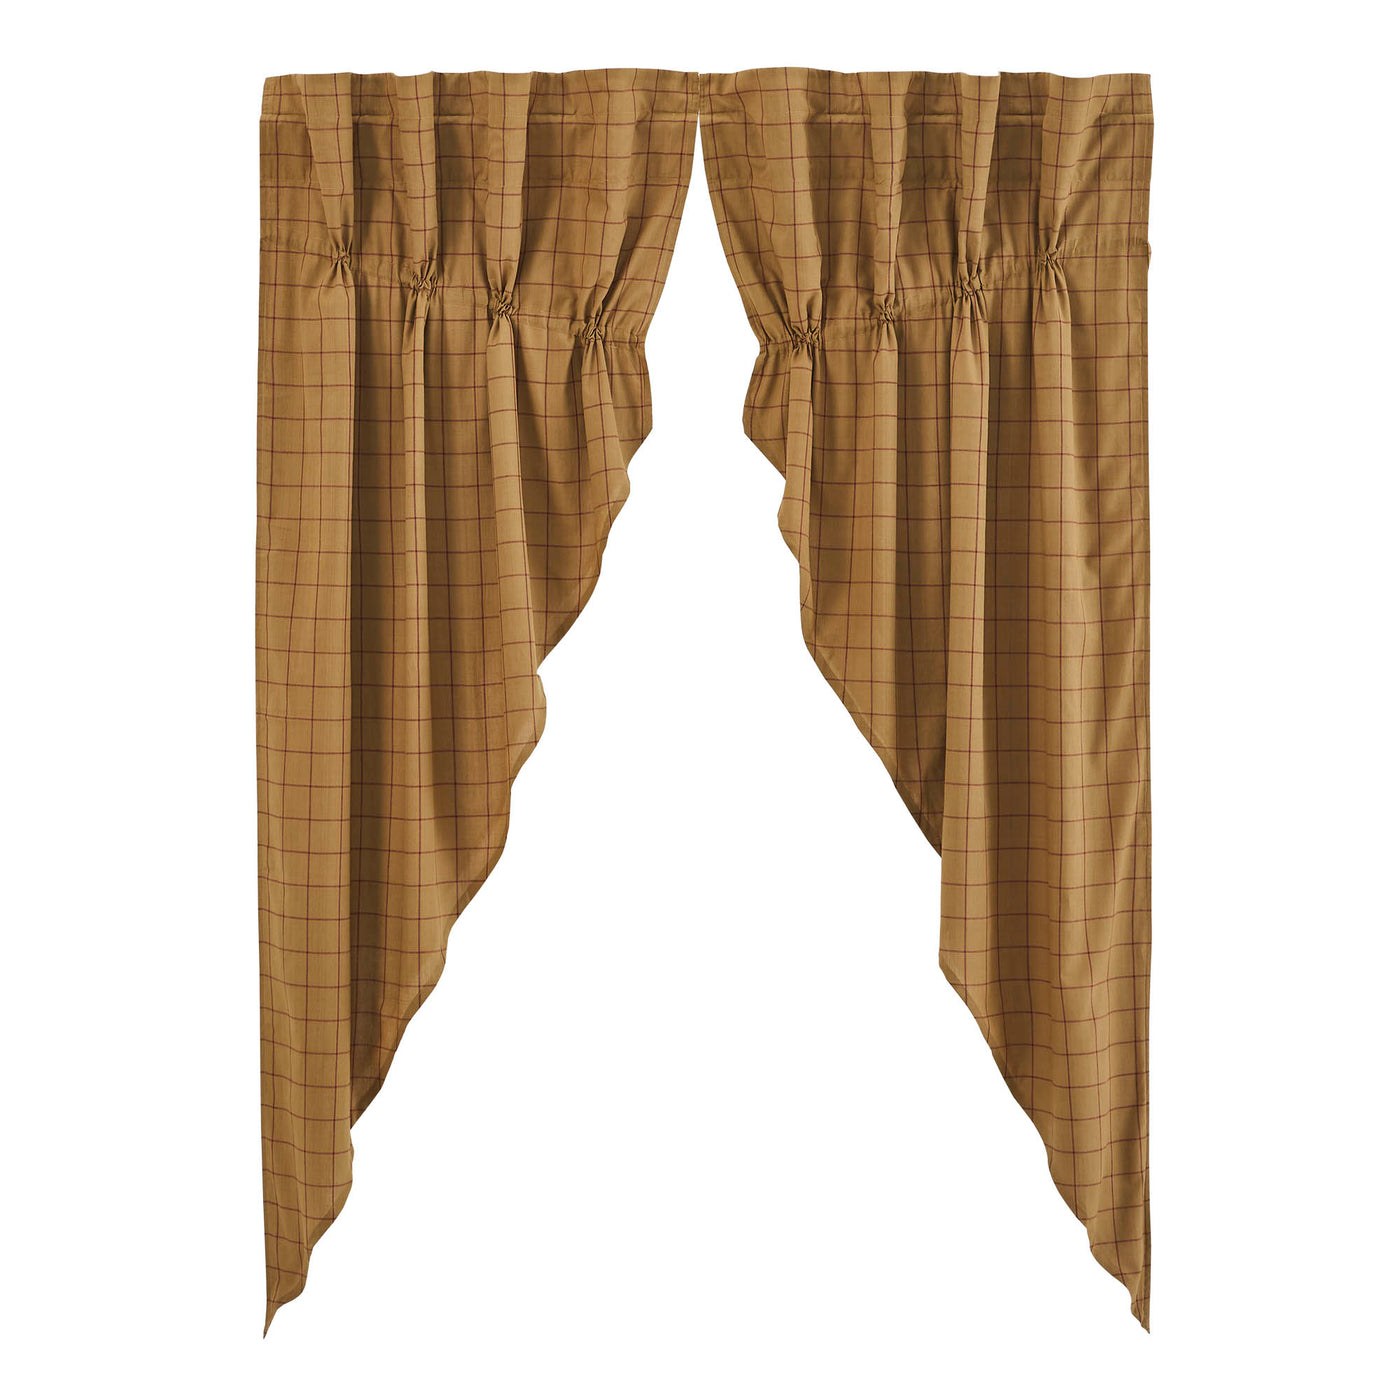 Connell Prairie Short Panel Curtains Set of 2 63"